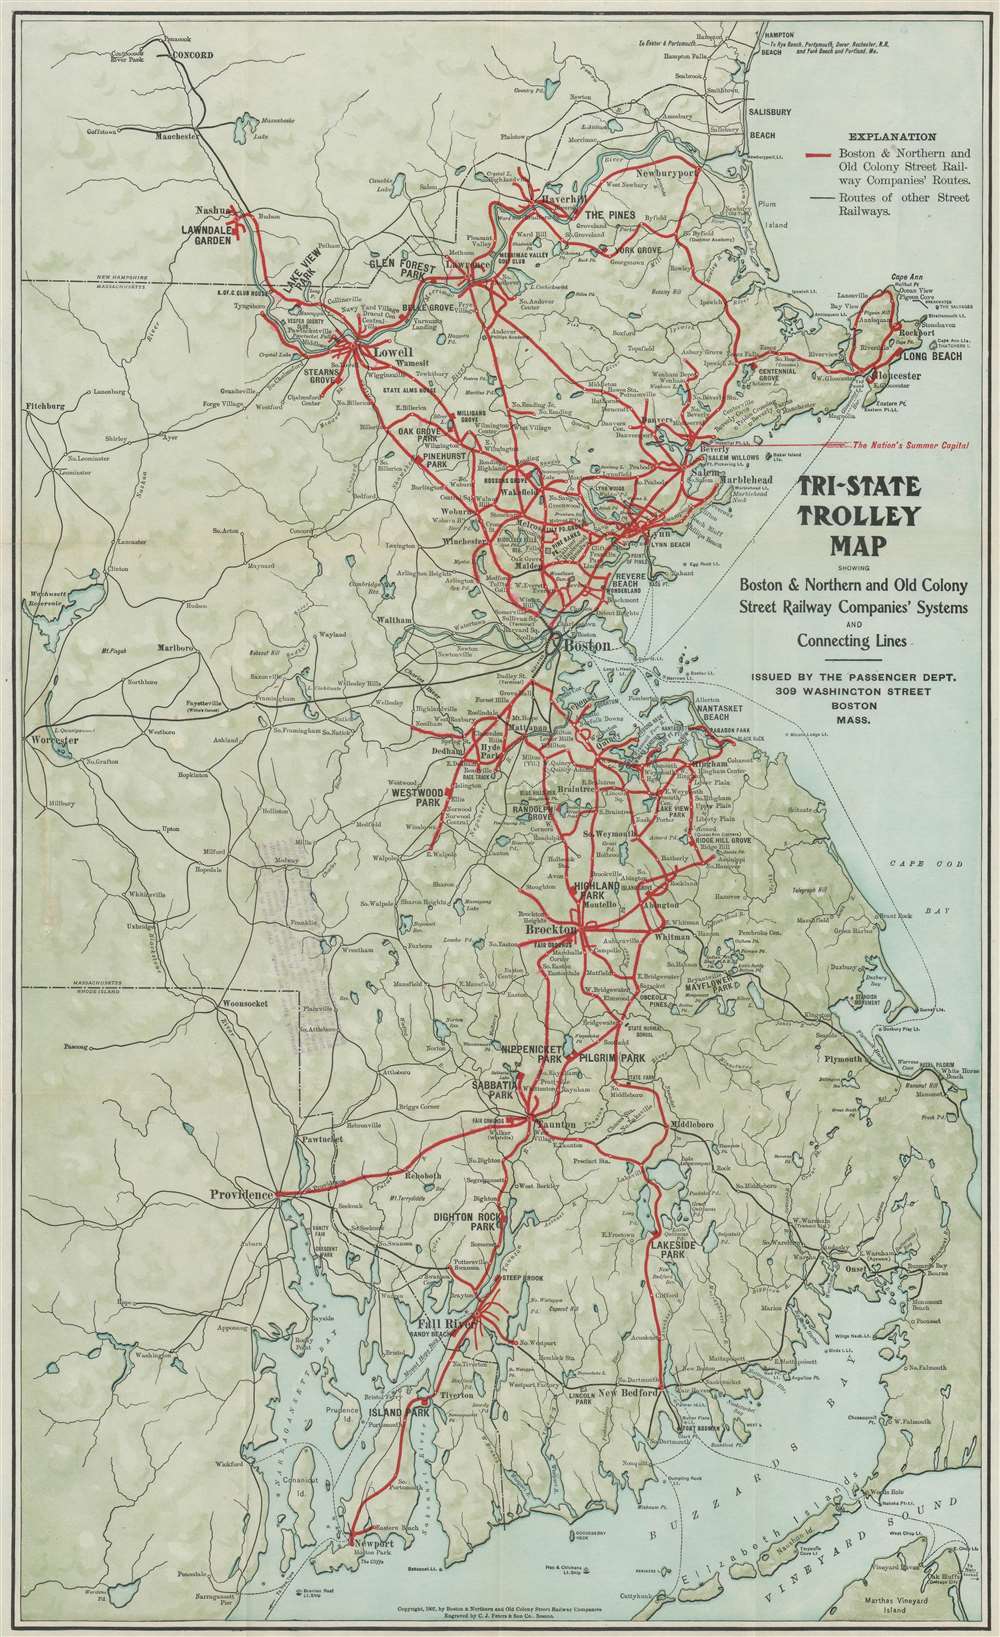 Tri-State Trolley Map Showing Boston and Northern and Old Colony Street Railway Companies' Systems and Connecting Lines. - Main View